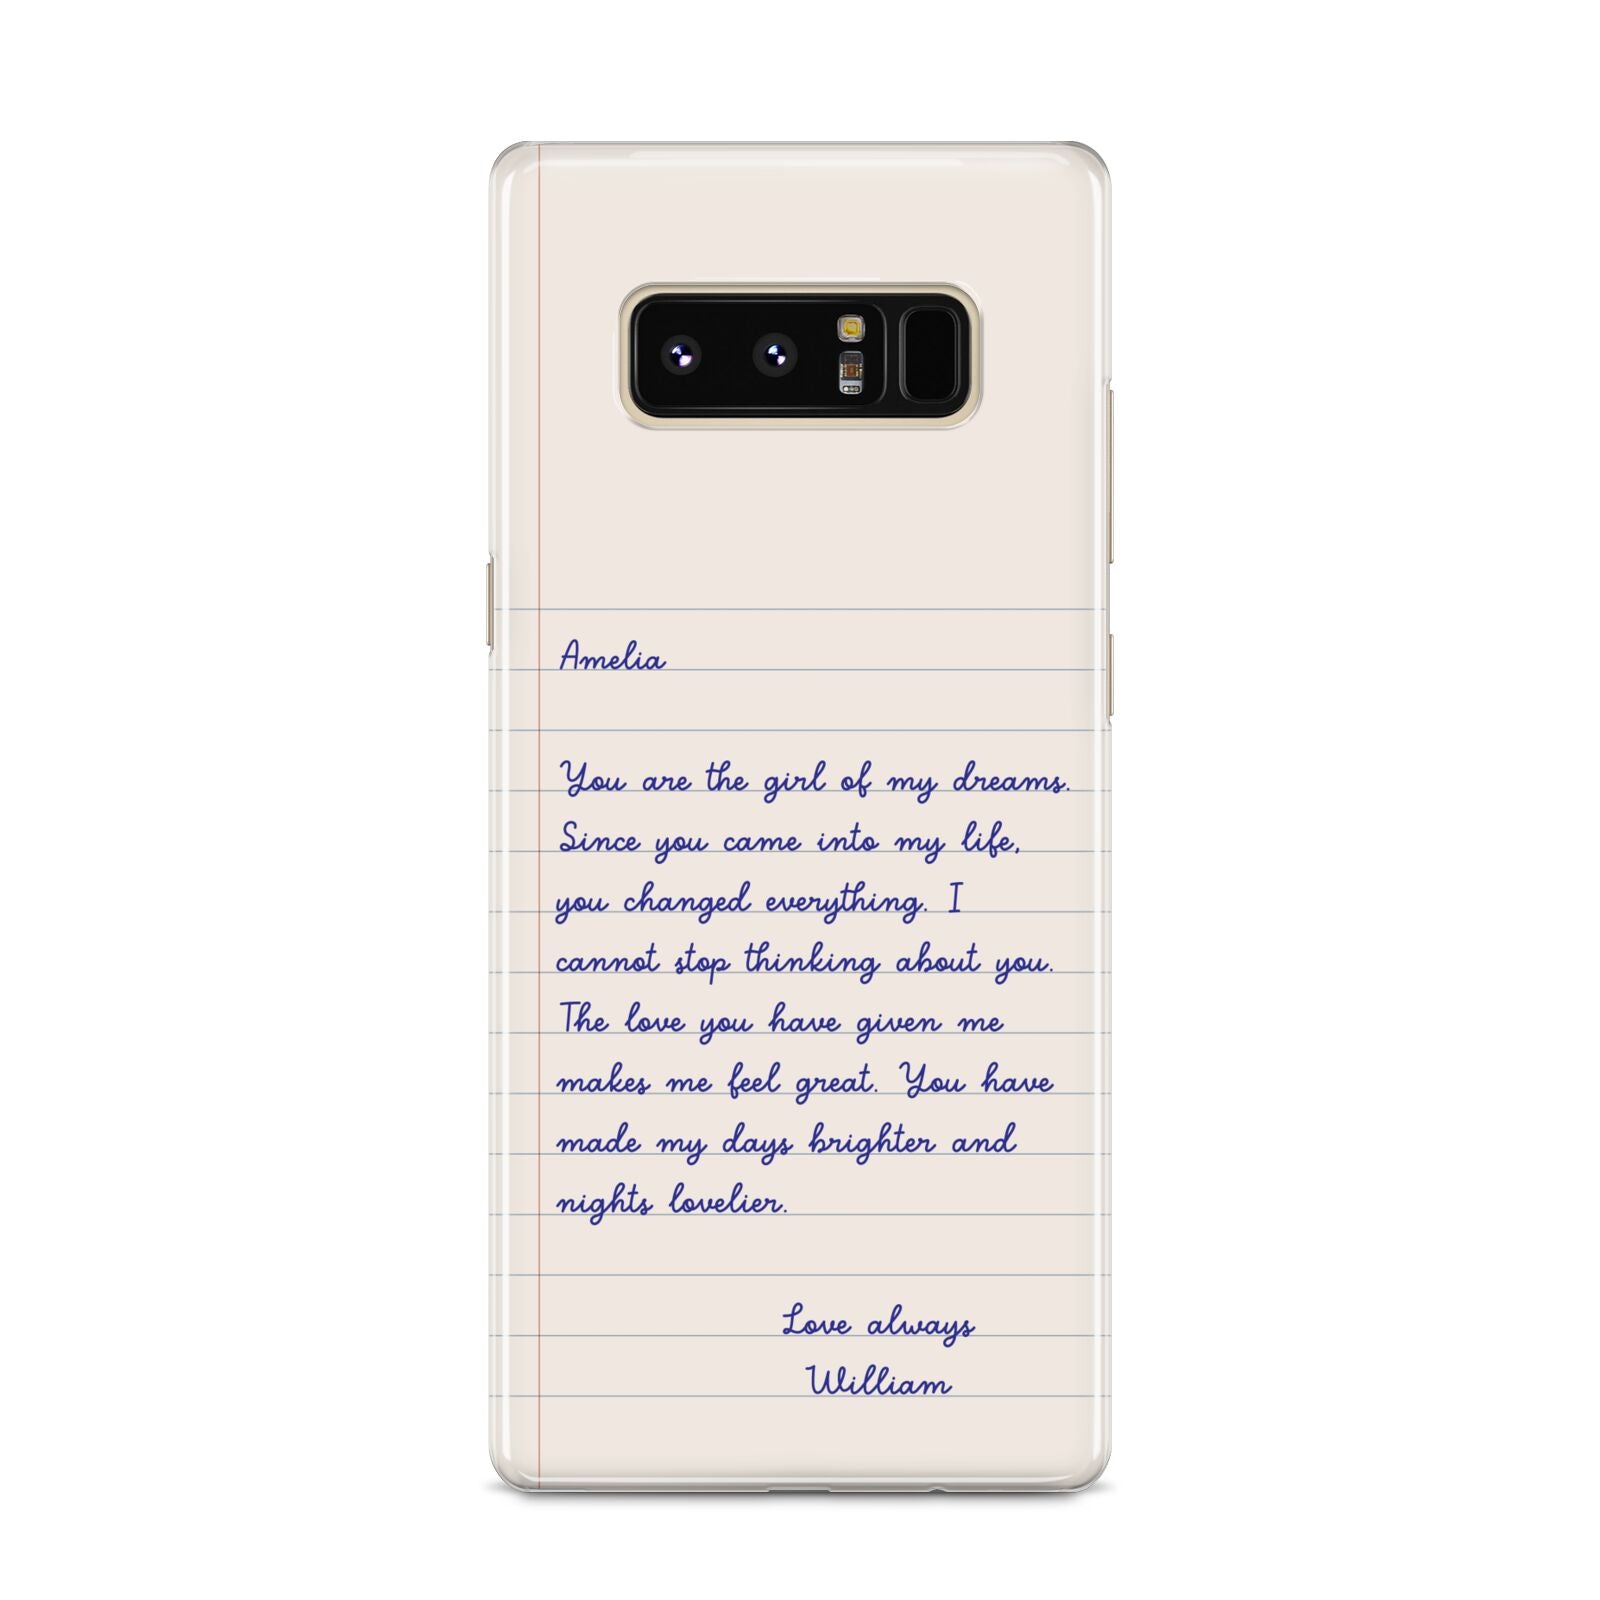 Personalised Love Letter Samsung Galaxy S8 Case